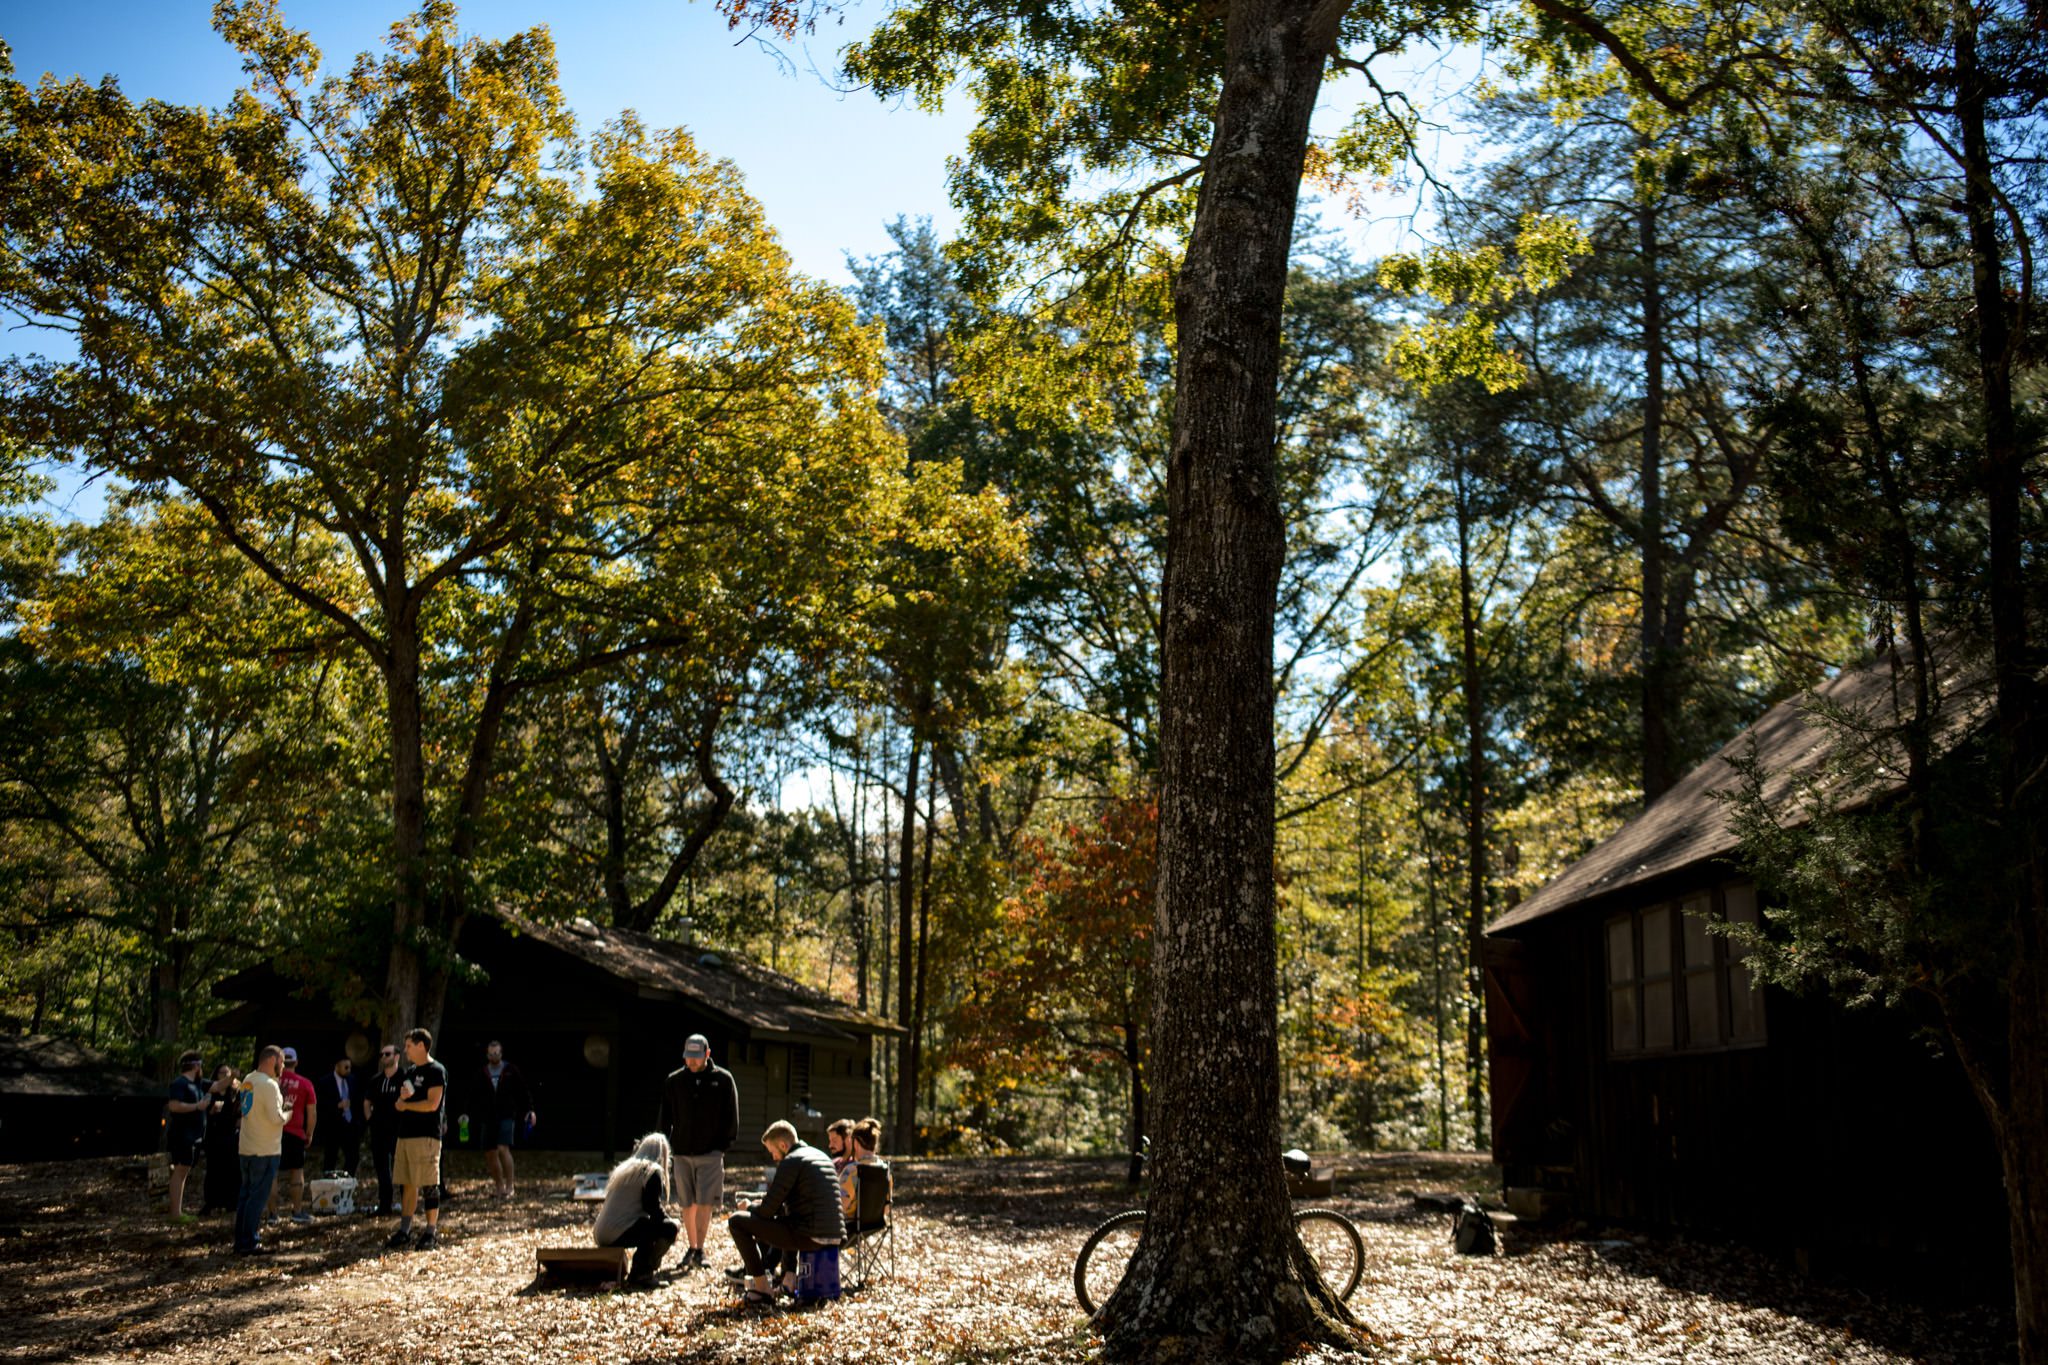 wedding guests get ready with activities before the wedding ceremony at camp highlander